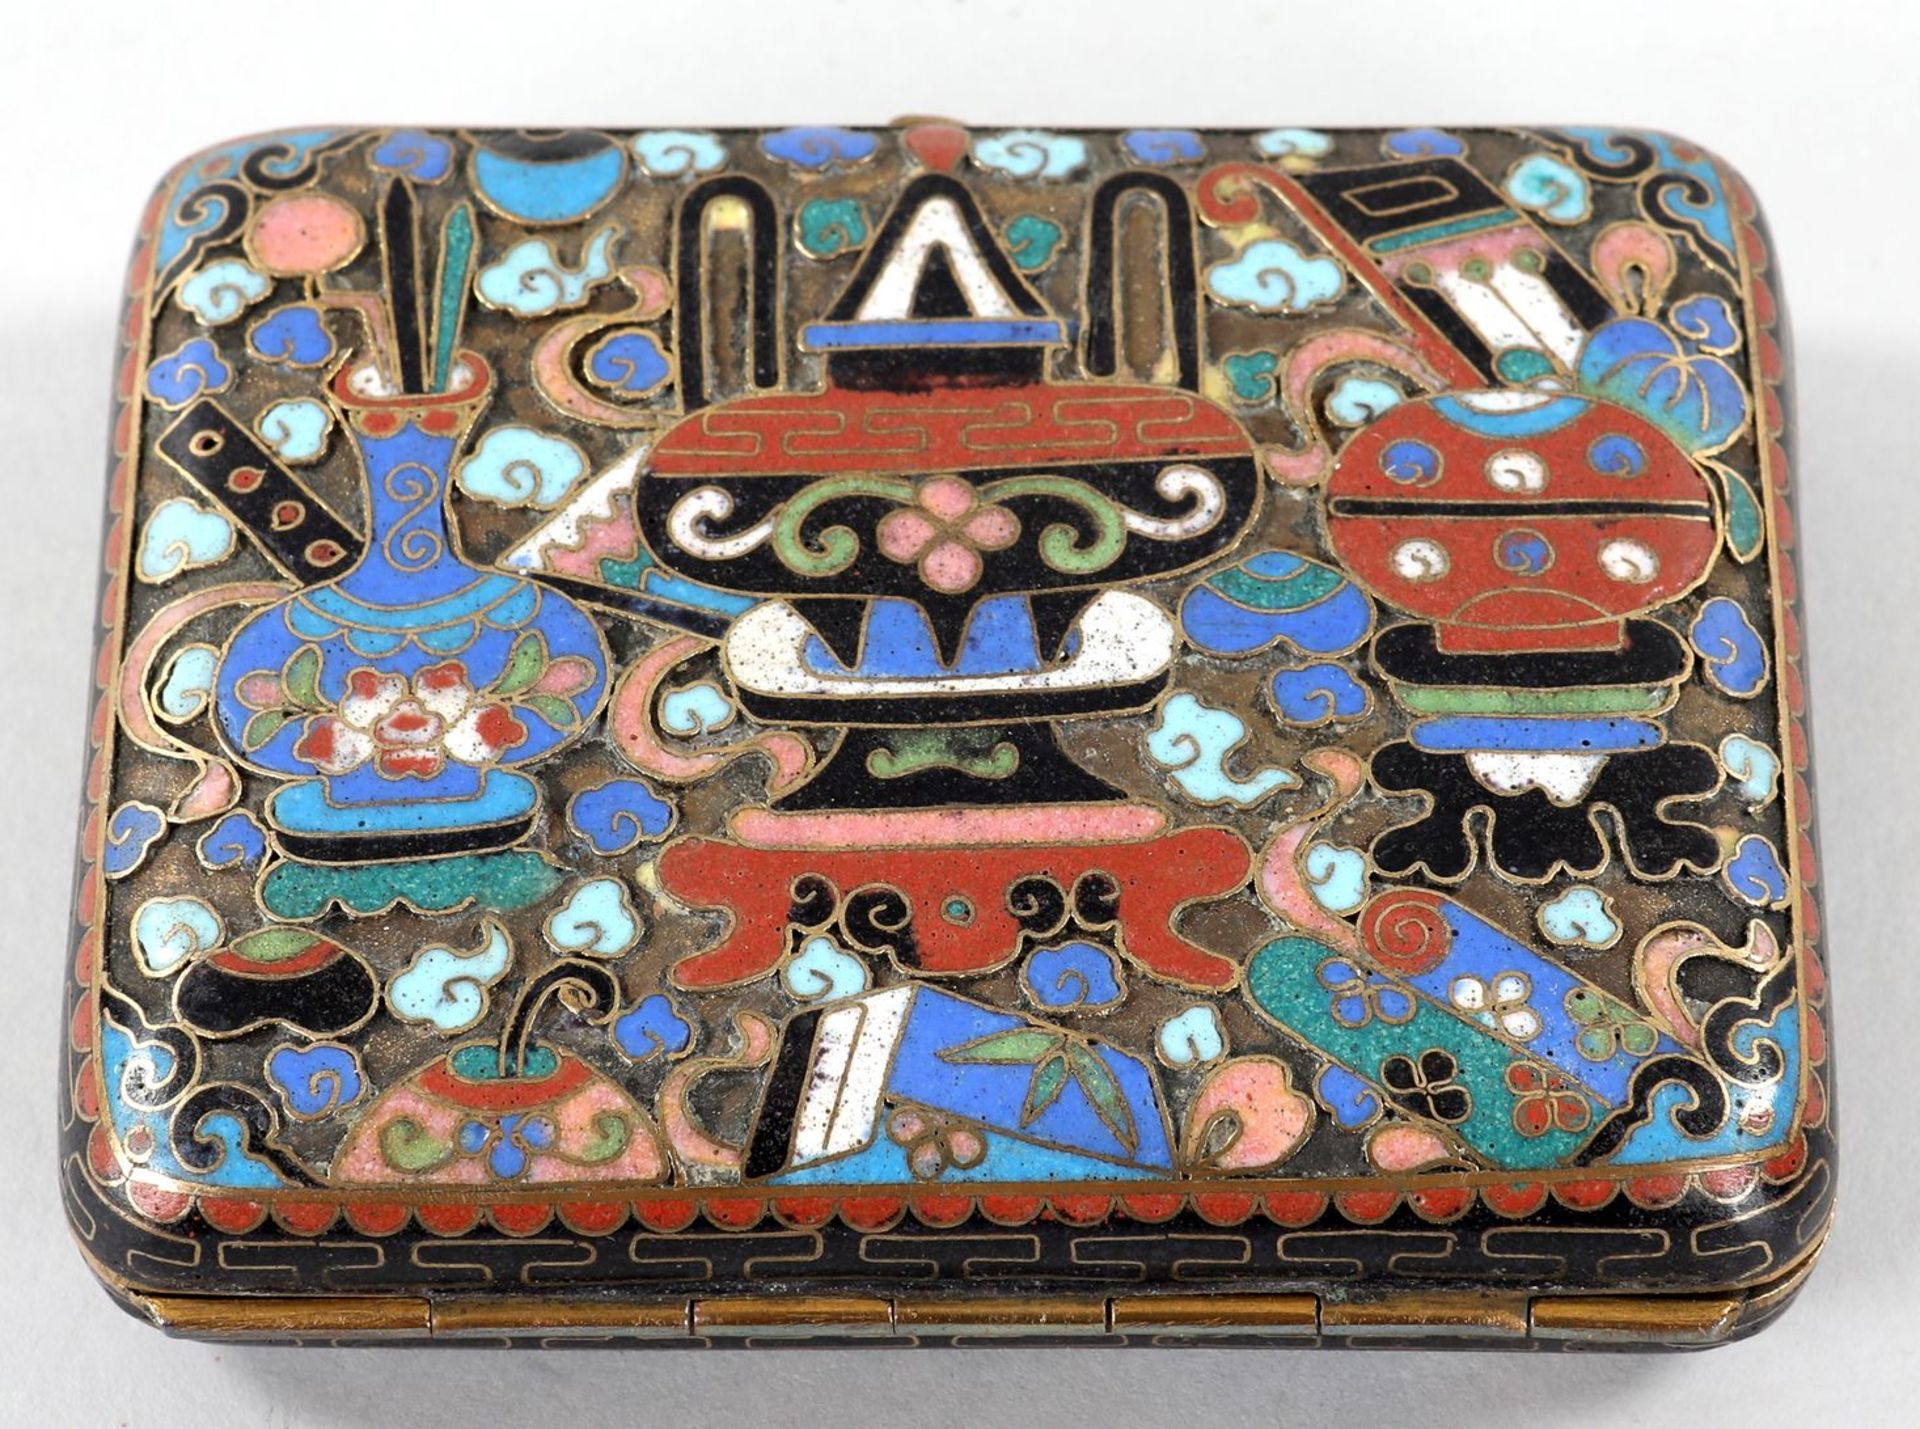 Zigaretten-Etui Messing/Email, China, - Image 2 of 2